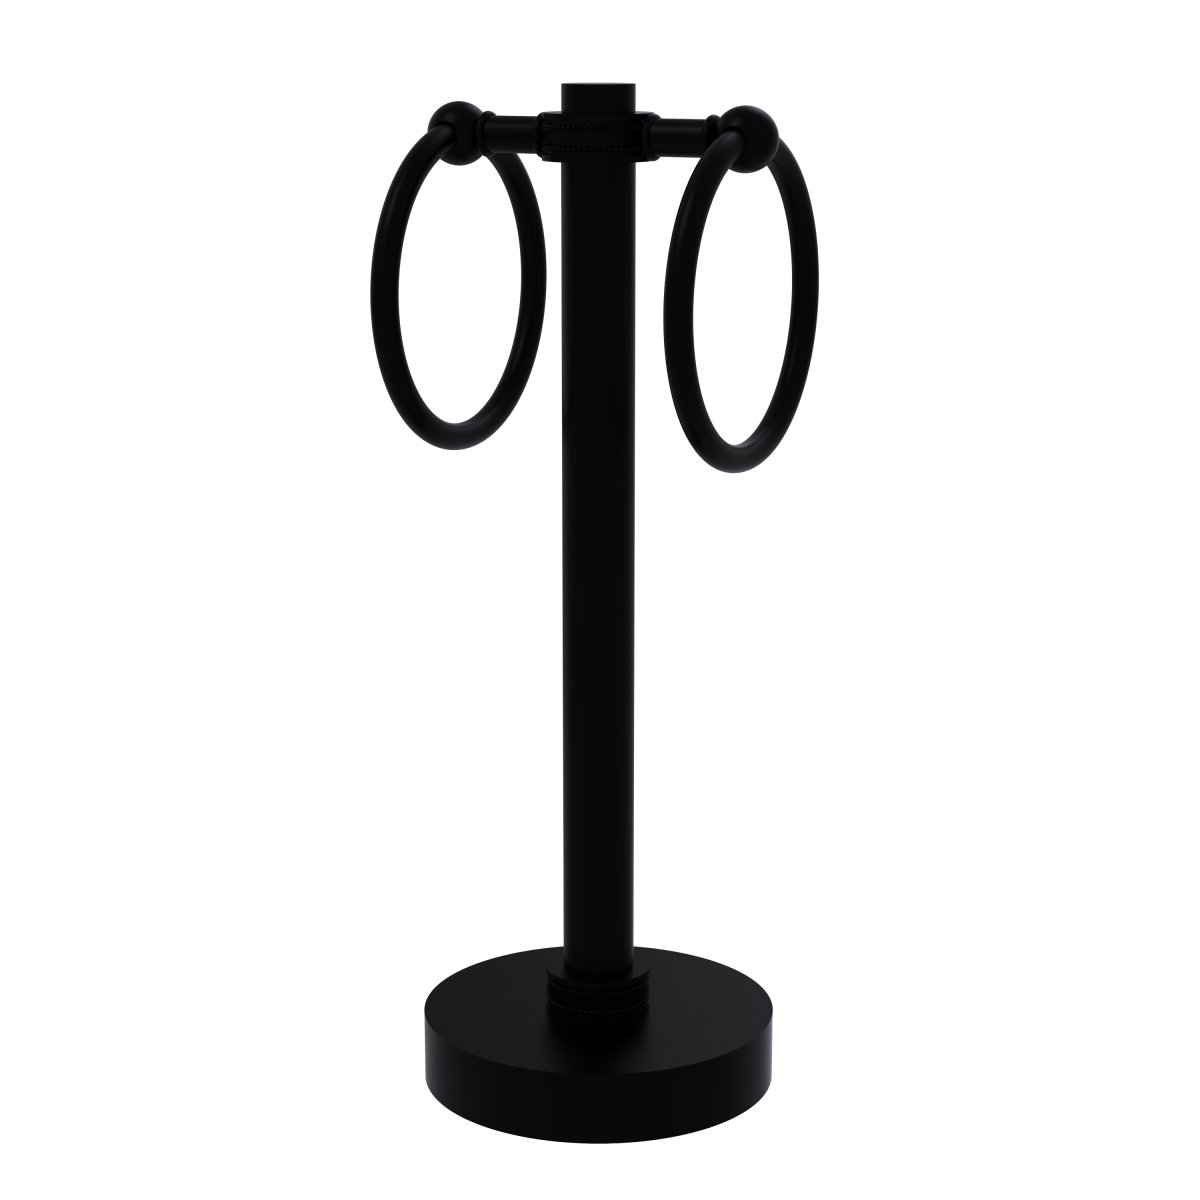 953d-bkm Vanity Top 2 Towel Ring Guest Towel Holder With Dotted Accents, Matte Black